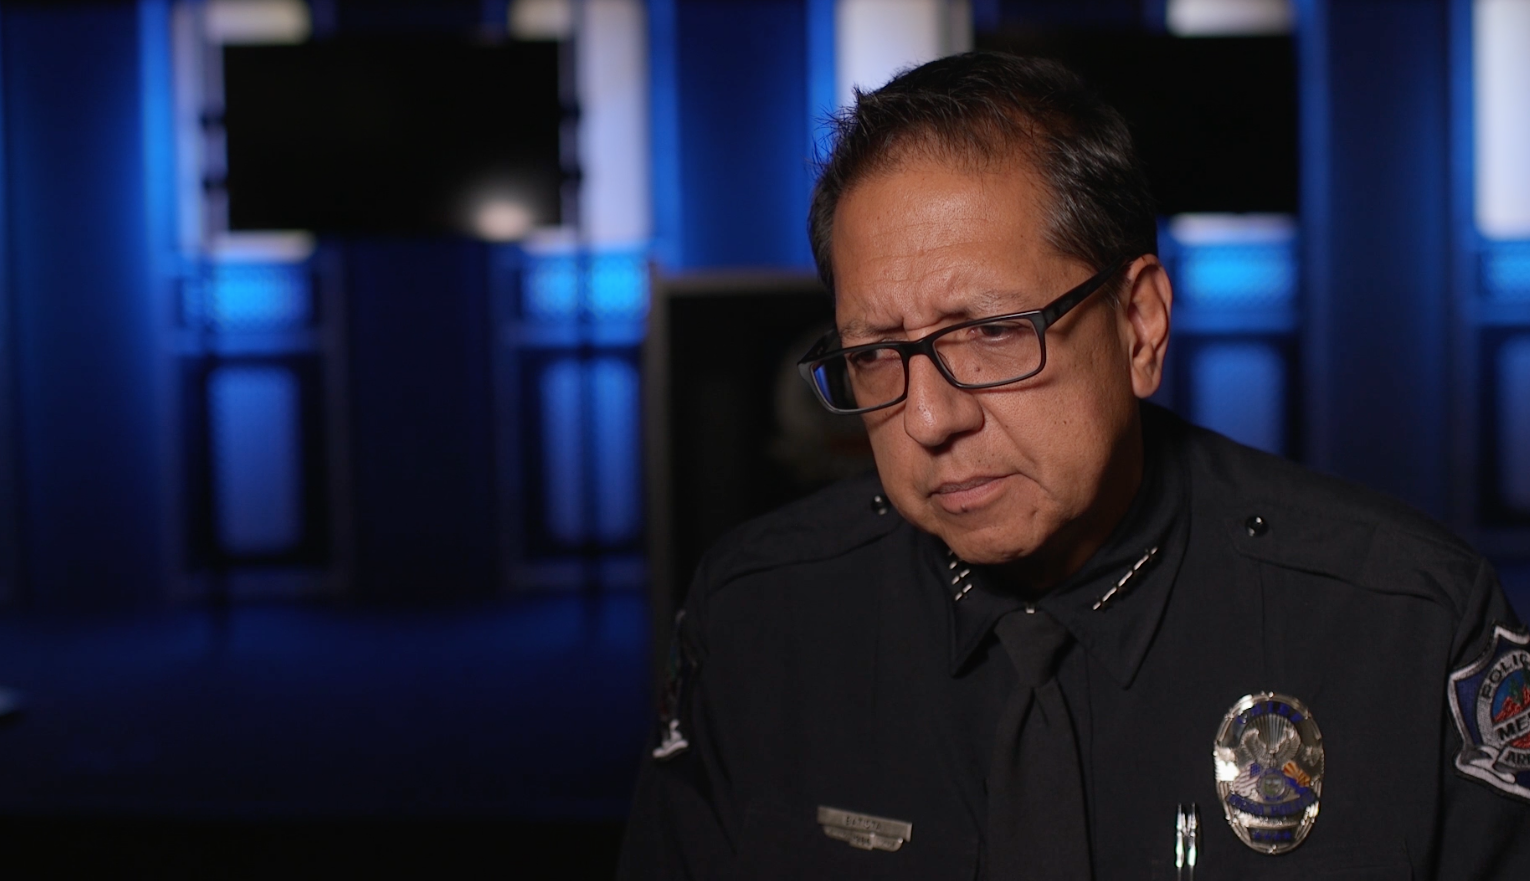 &apos;We will fix this&apos;: Mesa police chief calls for outside investigation into use of force